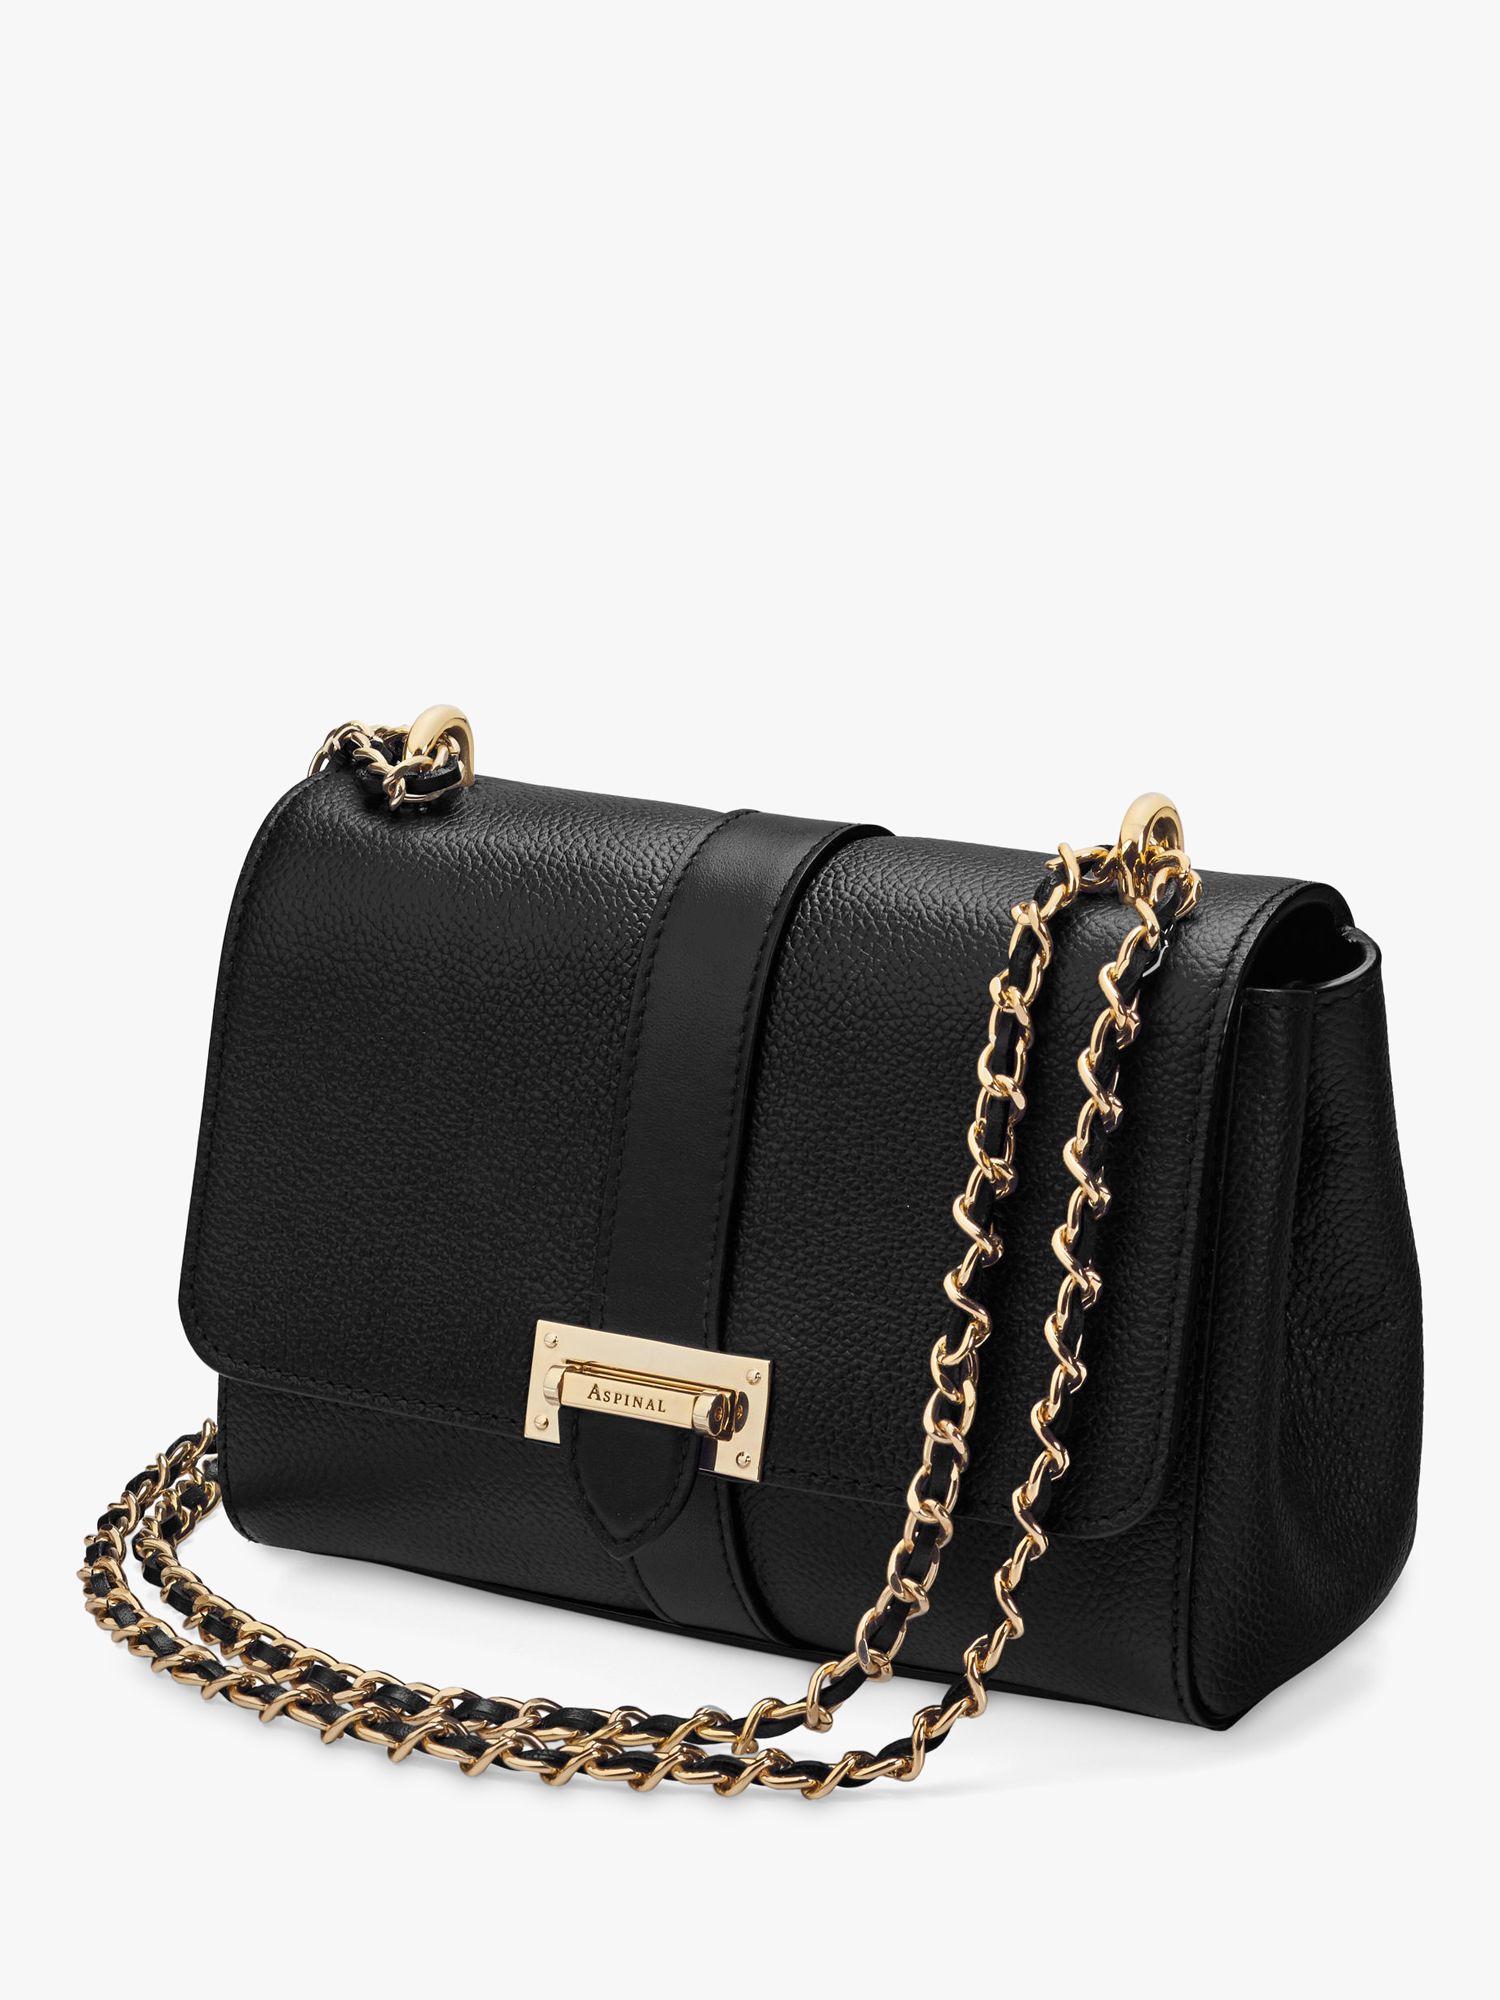 Aspinal of London Lottie Small Pebble Leather Shoulder Bag, Black at ...